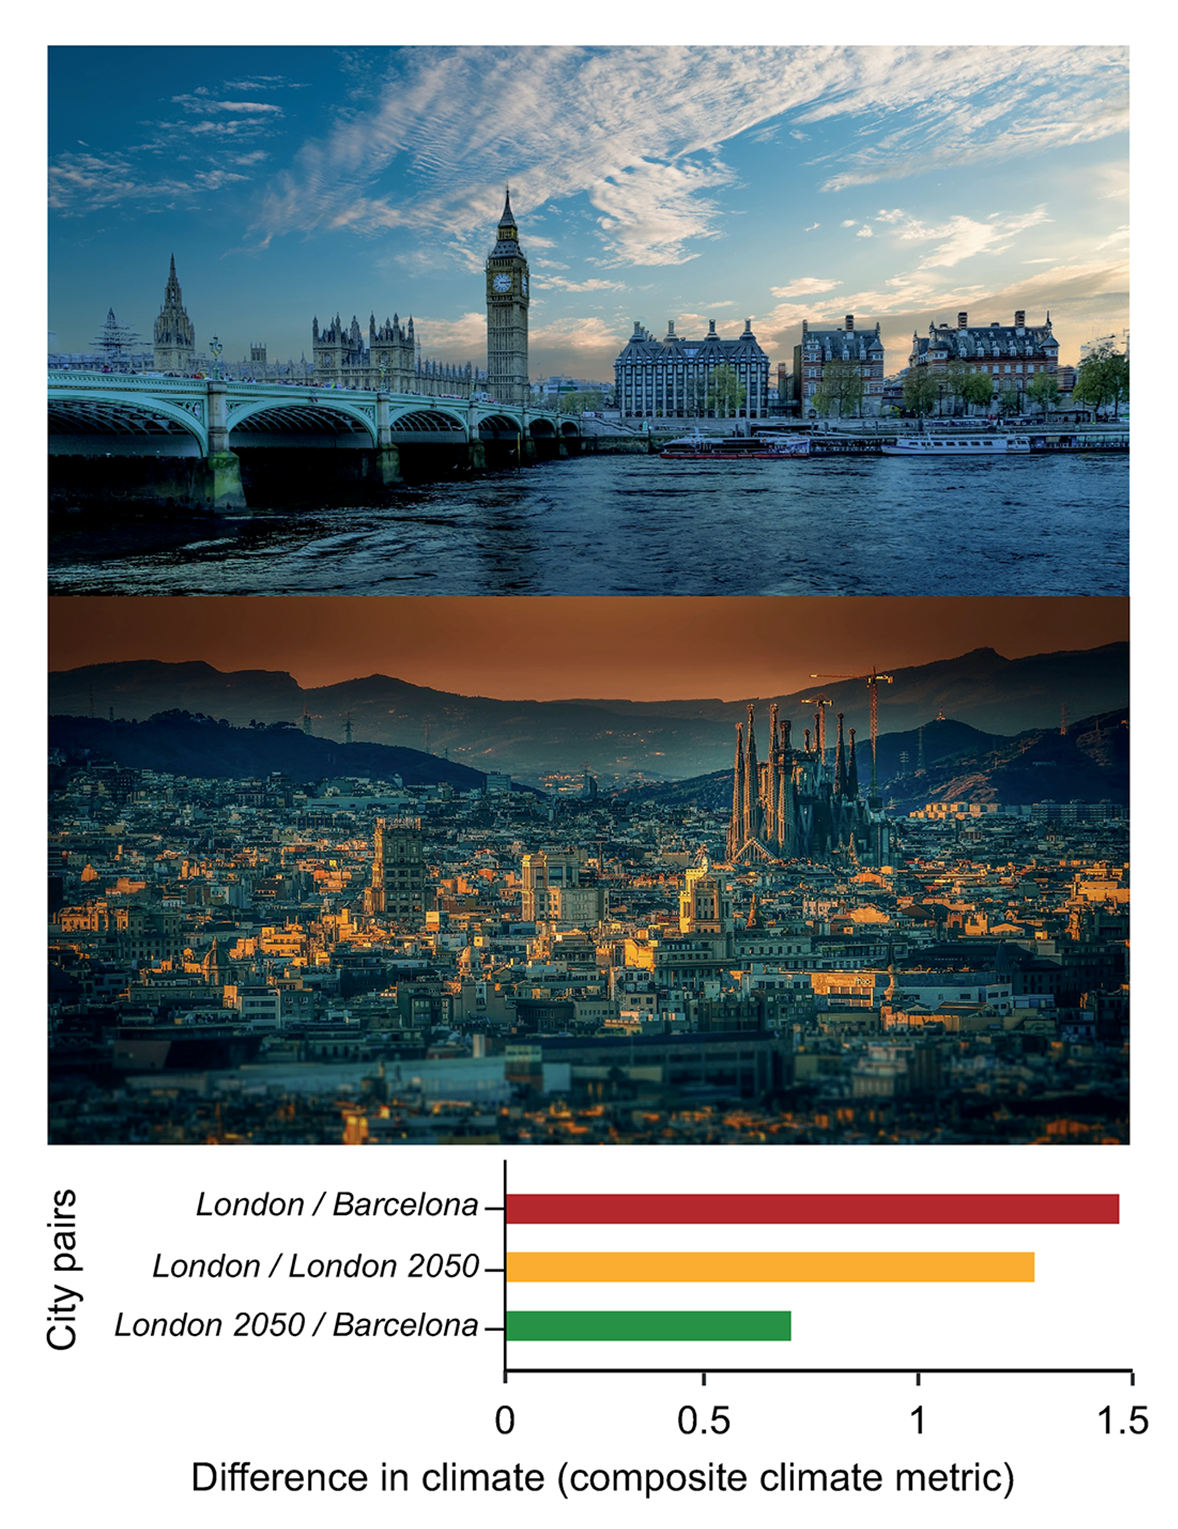 Difference between future and current climate for London and an example of a similar current counterpart, Barcelona. Graphic: Bastin, et al., 2019 / PLOS ONE